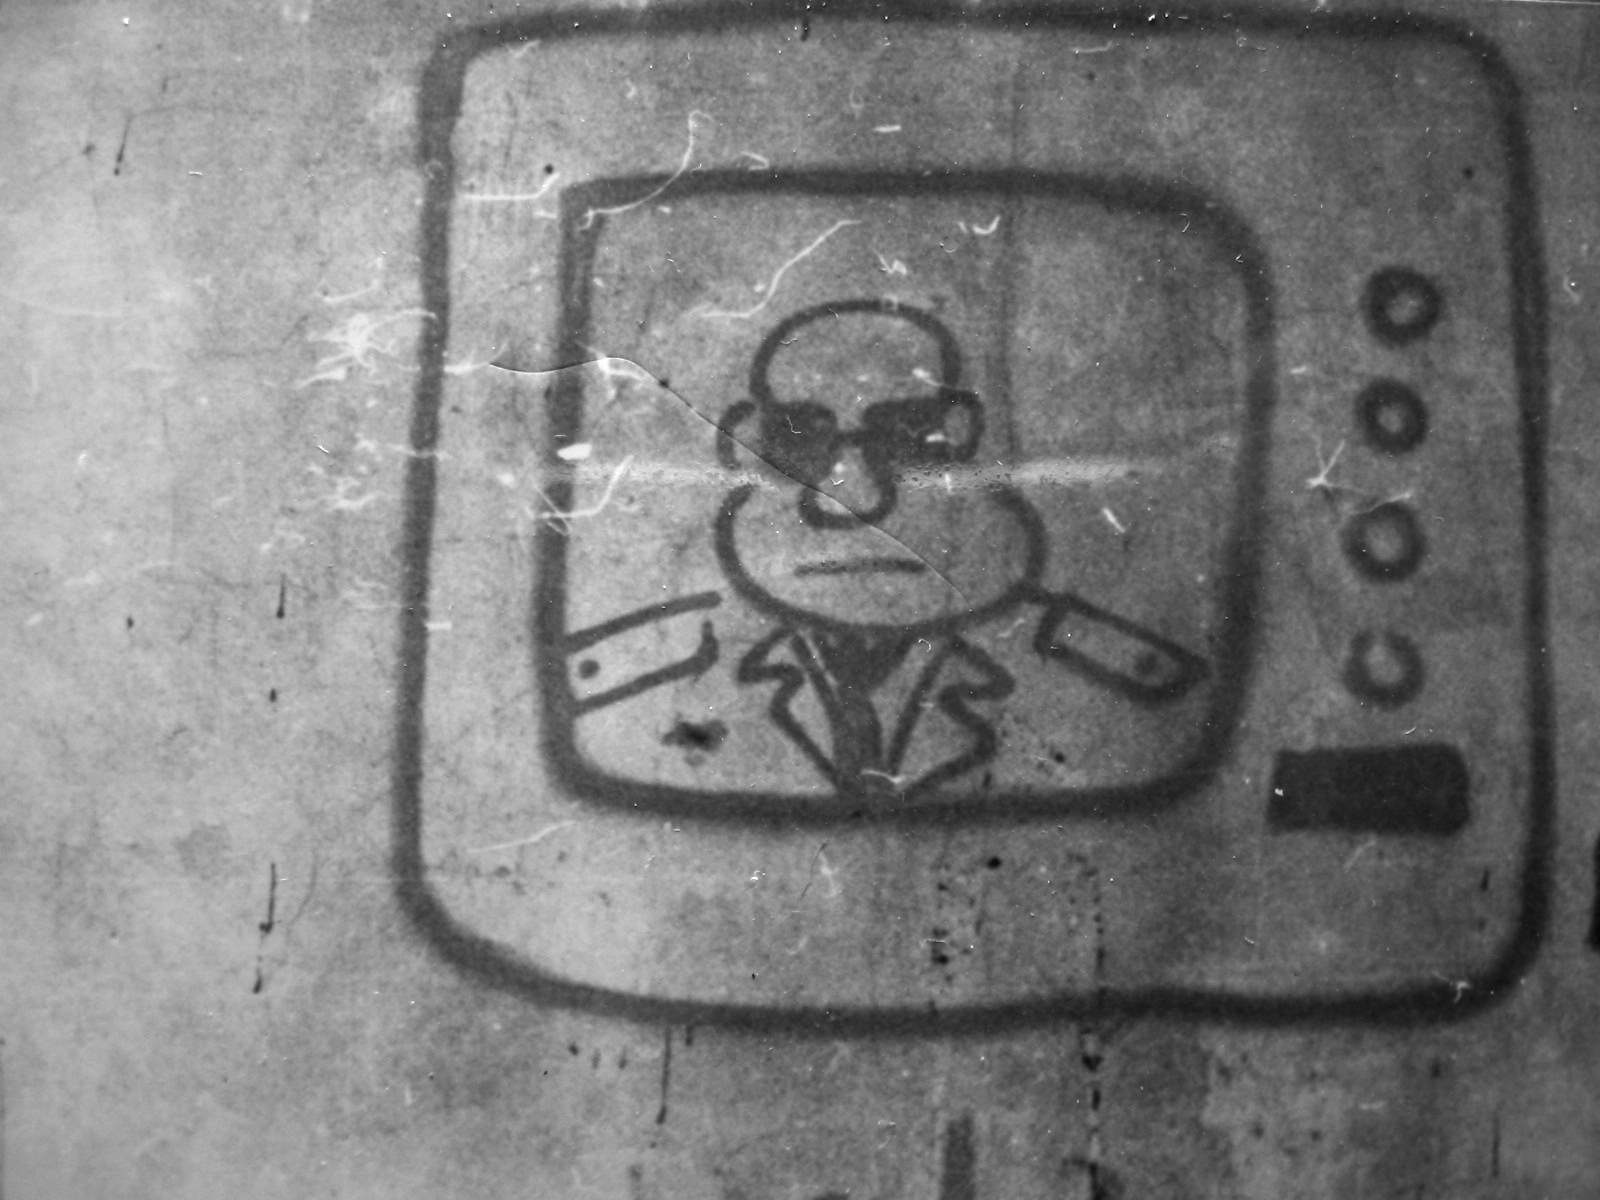 Photo of graffiti painted by Krzysztof Skiba on the wall in Łódź in 1989. The picture of a man in black eyeglasses in the TV was an obvious caricature of general Wojciech Jaruzelski.